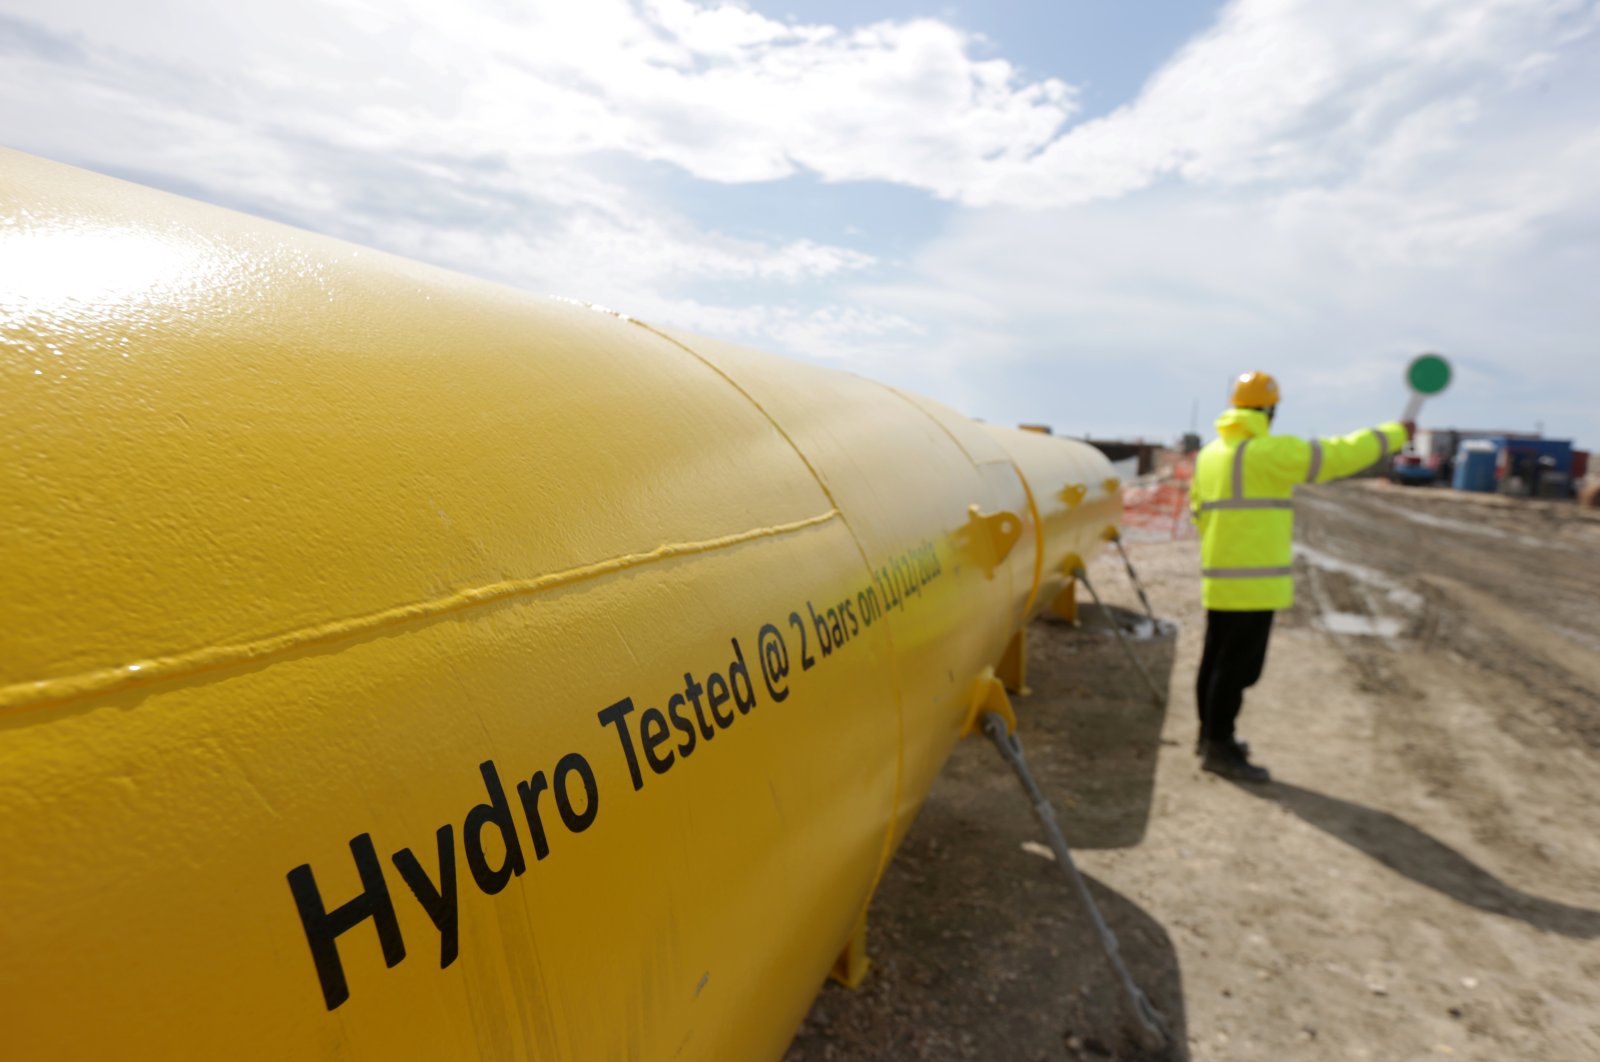 A buoyancy tank is pictured at the Trans Adriatic Pipeline (TAP) in Seman near Fier, Albania, April 11, 2019. (Reuters File Photo)